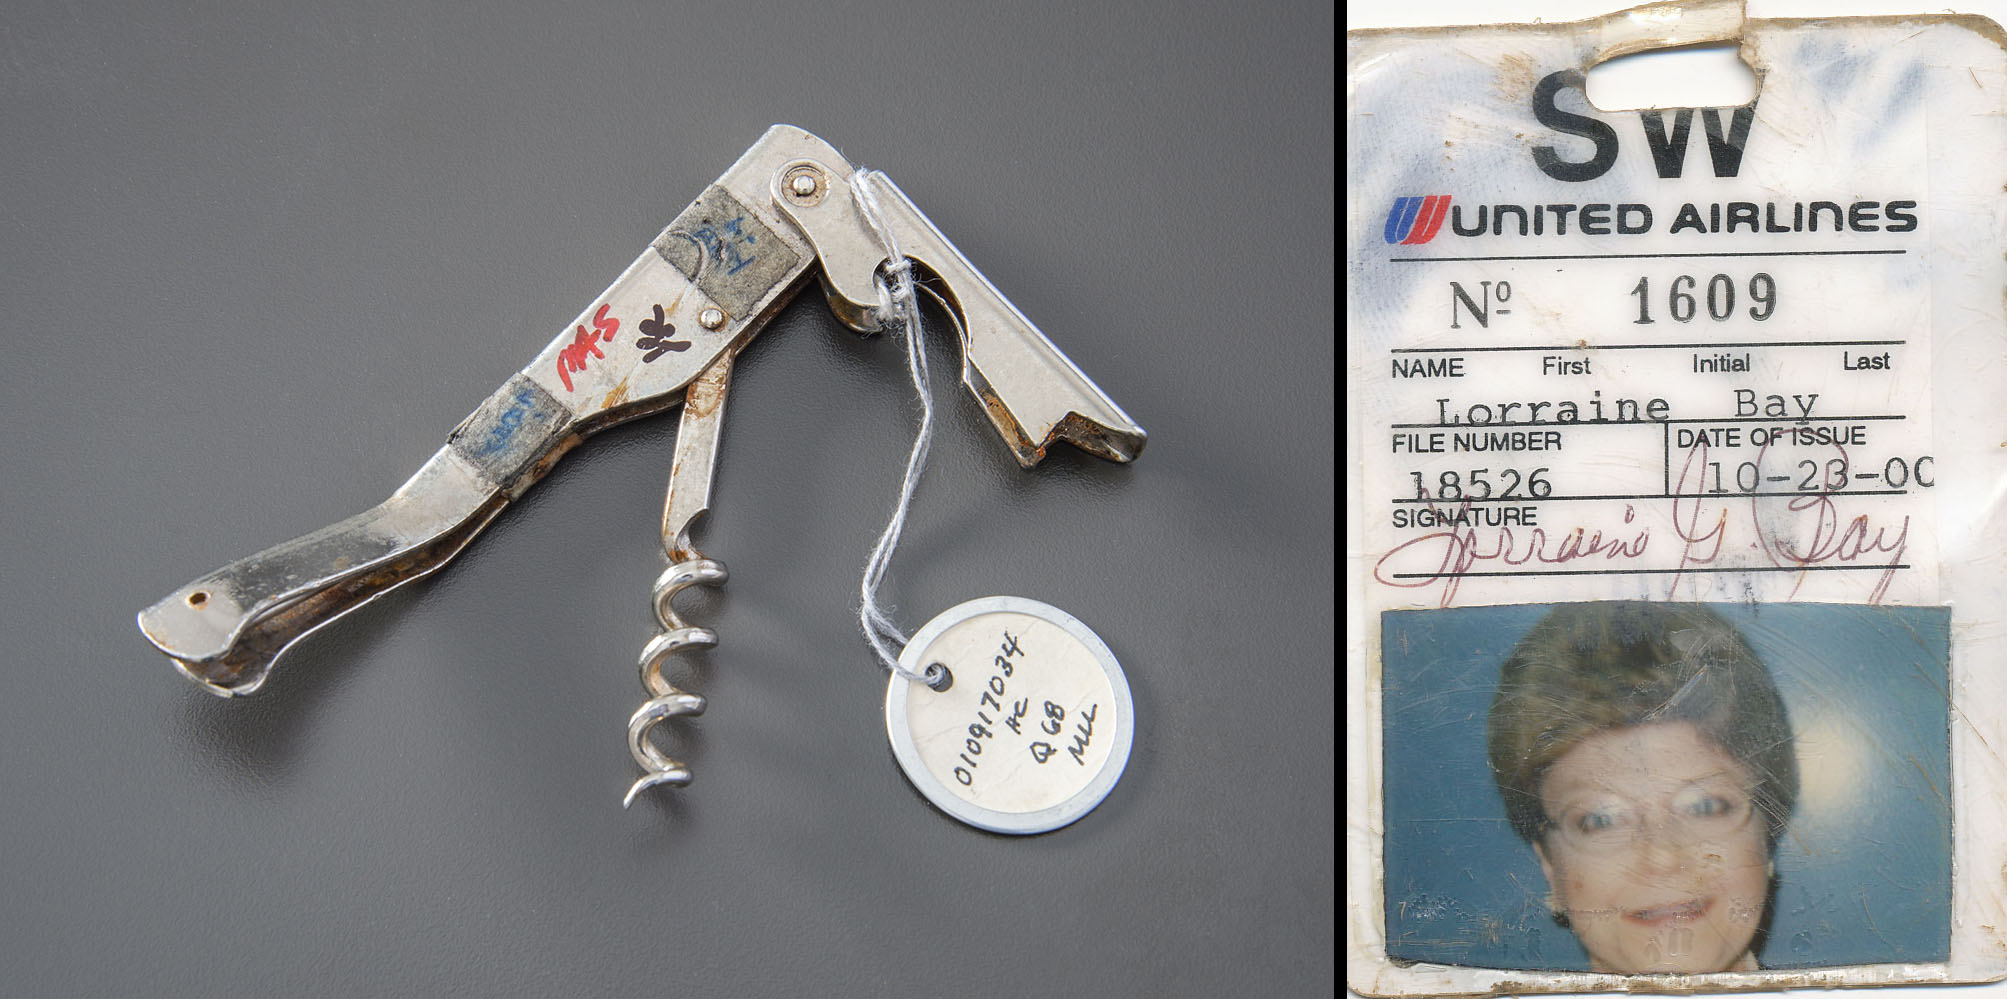 A corkscrew belonging to flight attendant Lorraine Bay with an FBI identification tag attached to it is displayed on a gray surface at the Museum. An image to the left shows Bay’s recovered United Airlines ID badge.